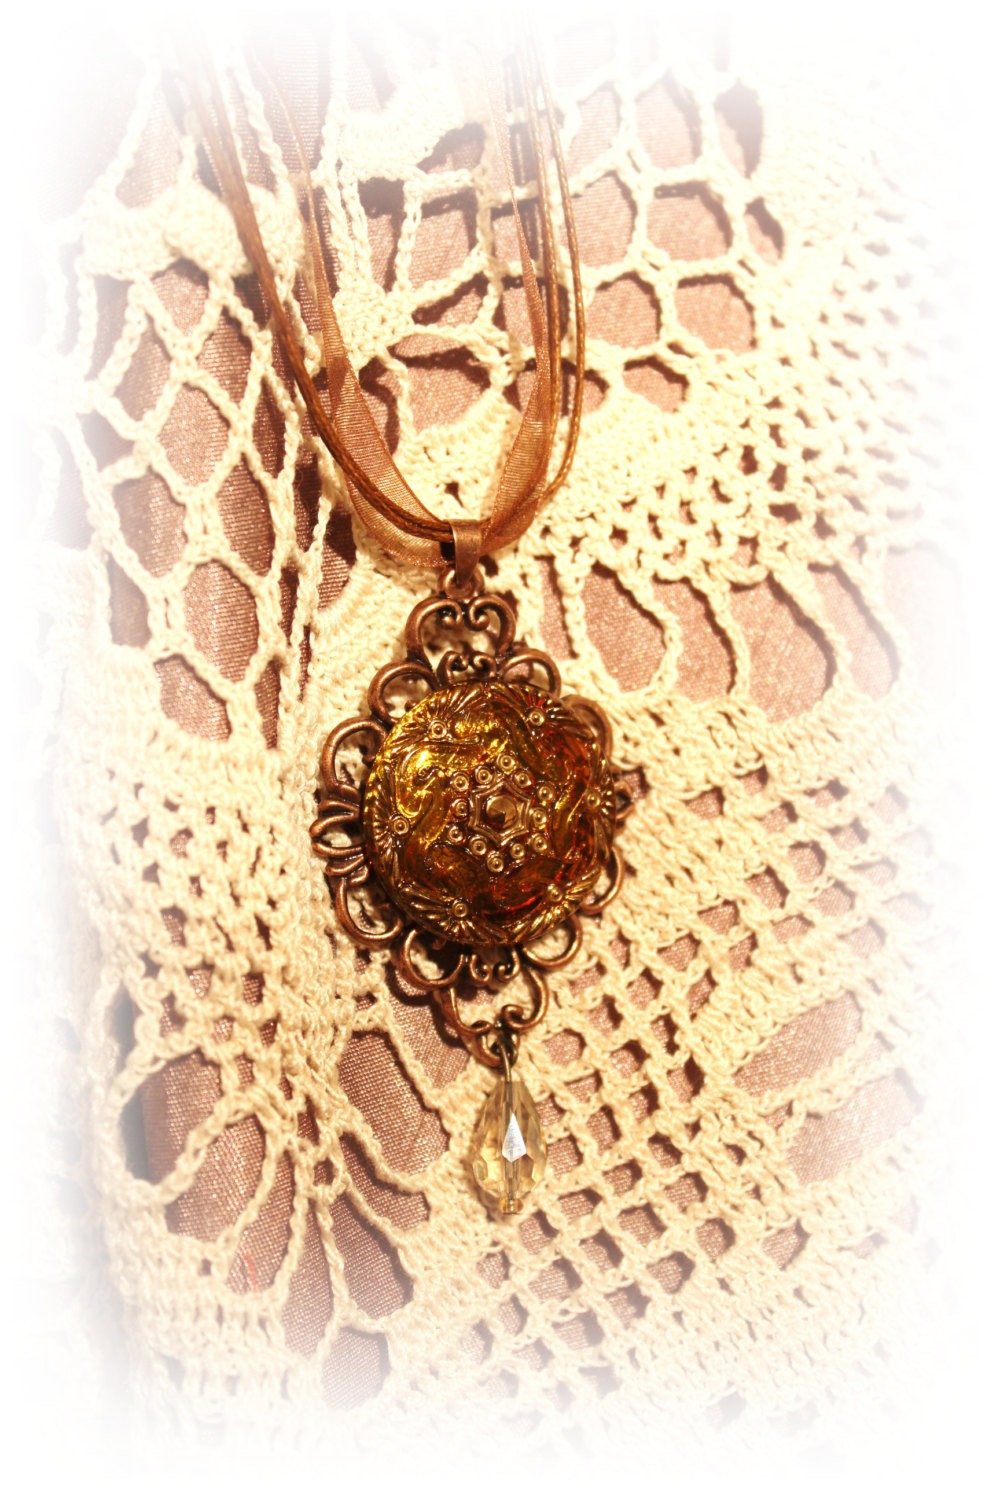 Czech Glass Button Pendant Necklace - Gold on Rose Gold with a teardrop dangle bead - Victorian Steampunk Taffeta Cord Jewelry steampunk buy now online